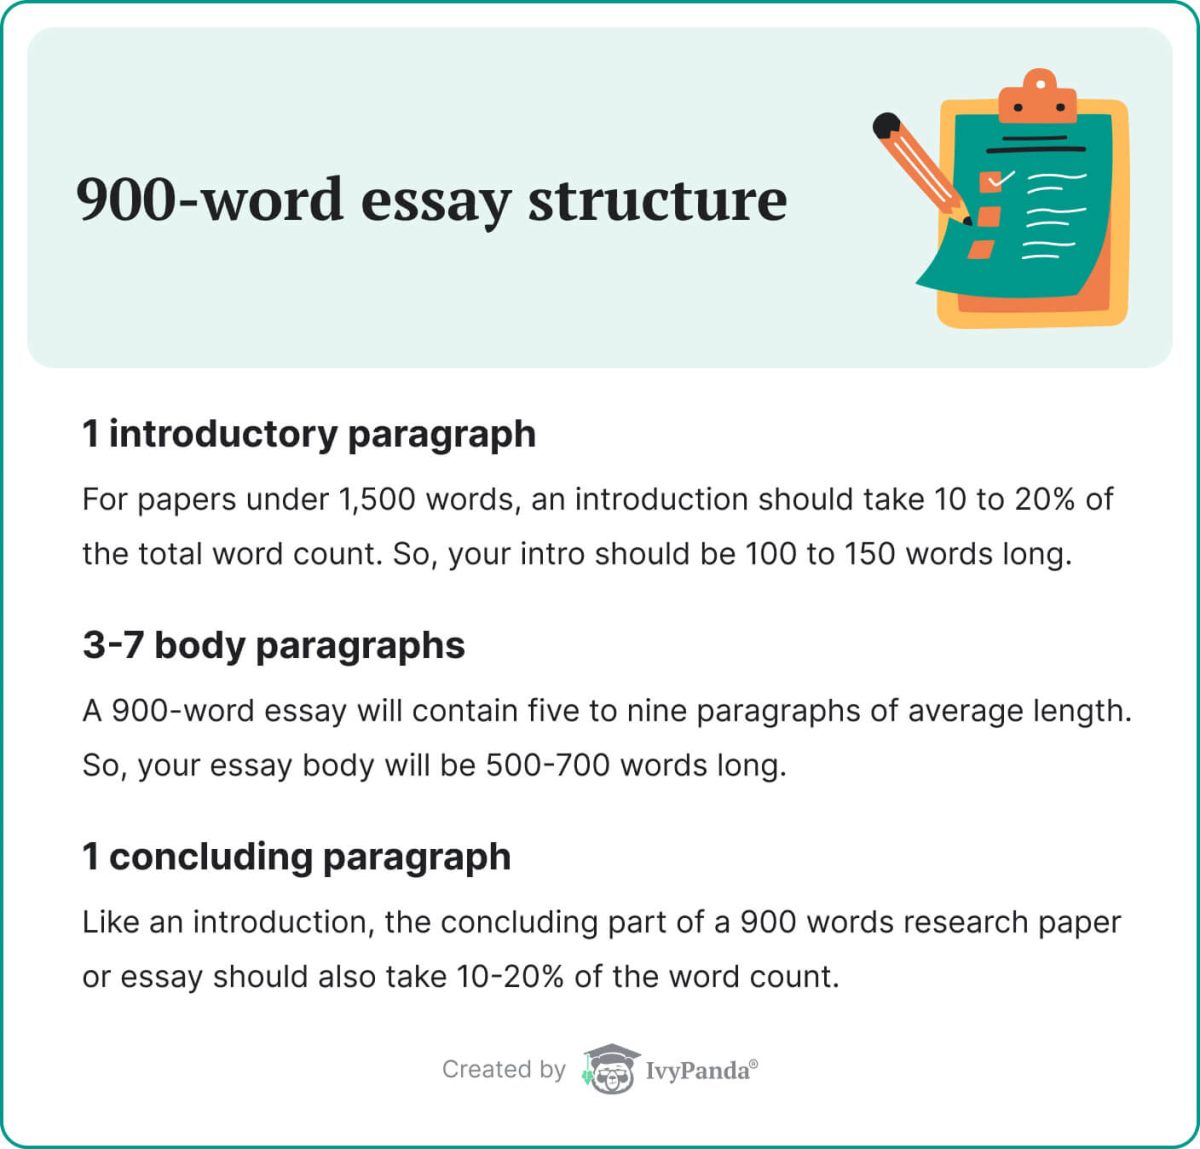 The picture lists the components of a 900-word essay.